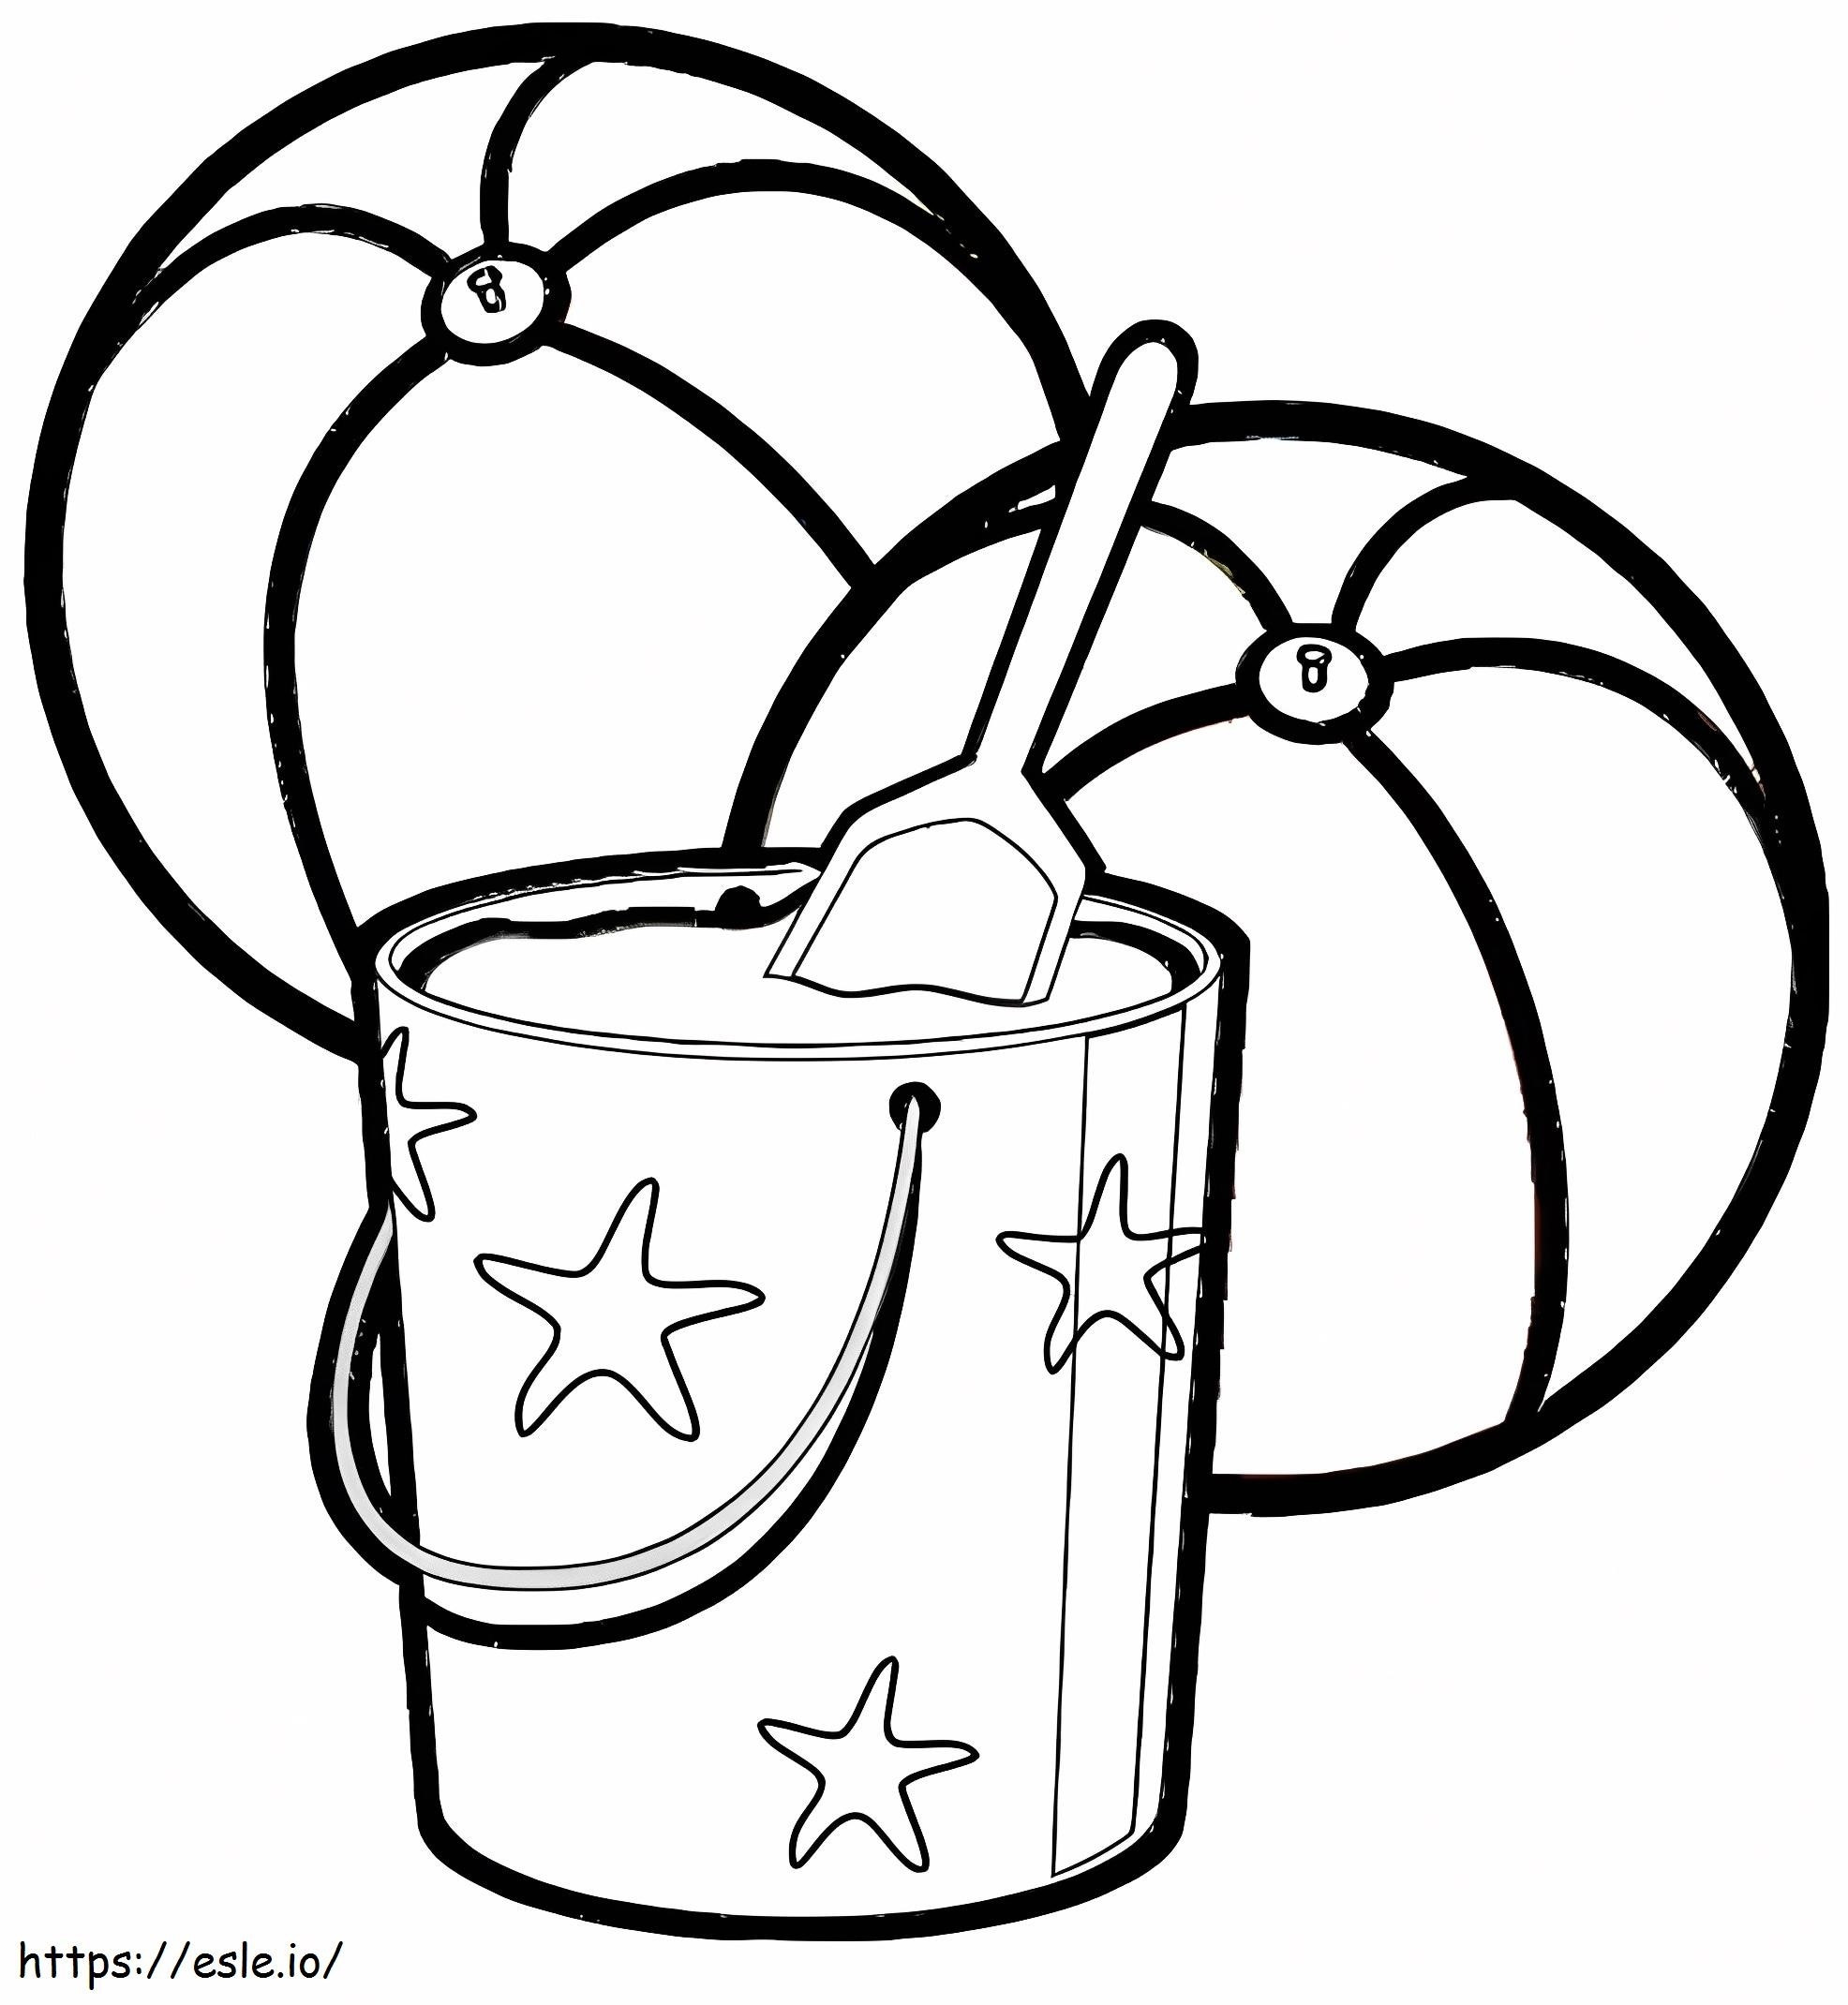 Summer Beach Ball coloring page